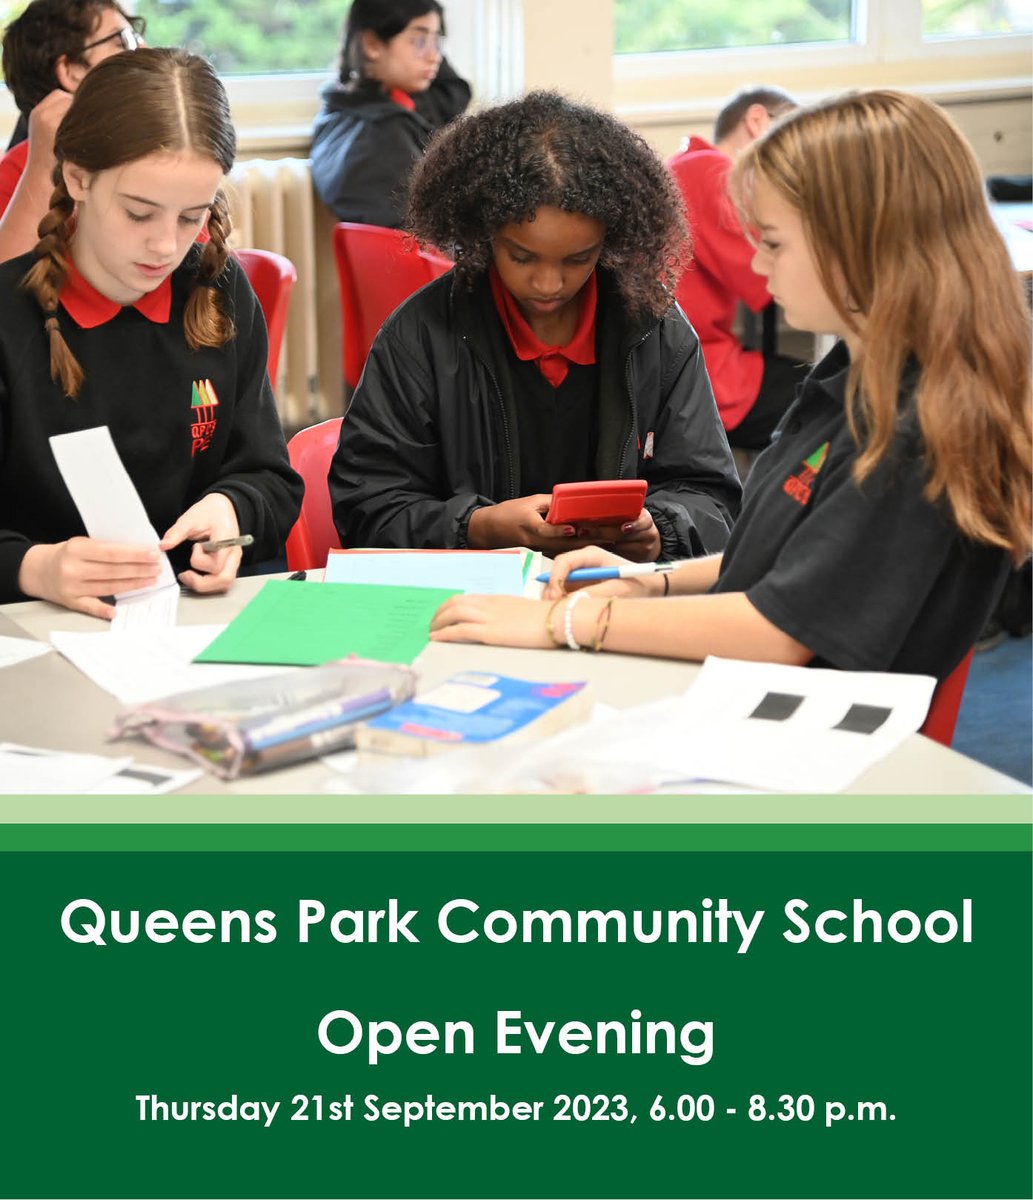 We are looking forward to welcoming families to the QPCS Open Evening tonight at 6.00pm.